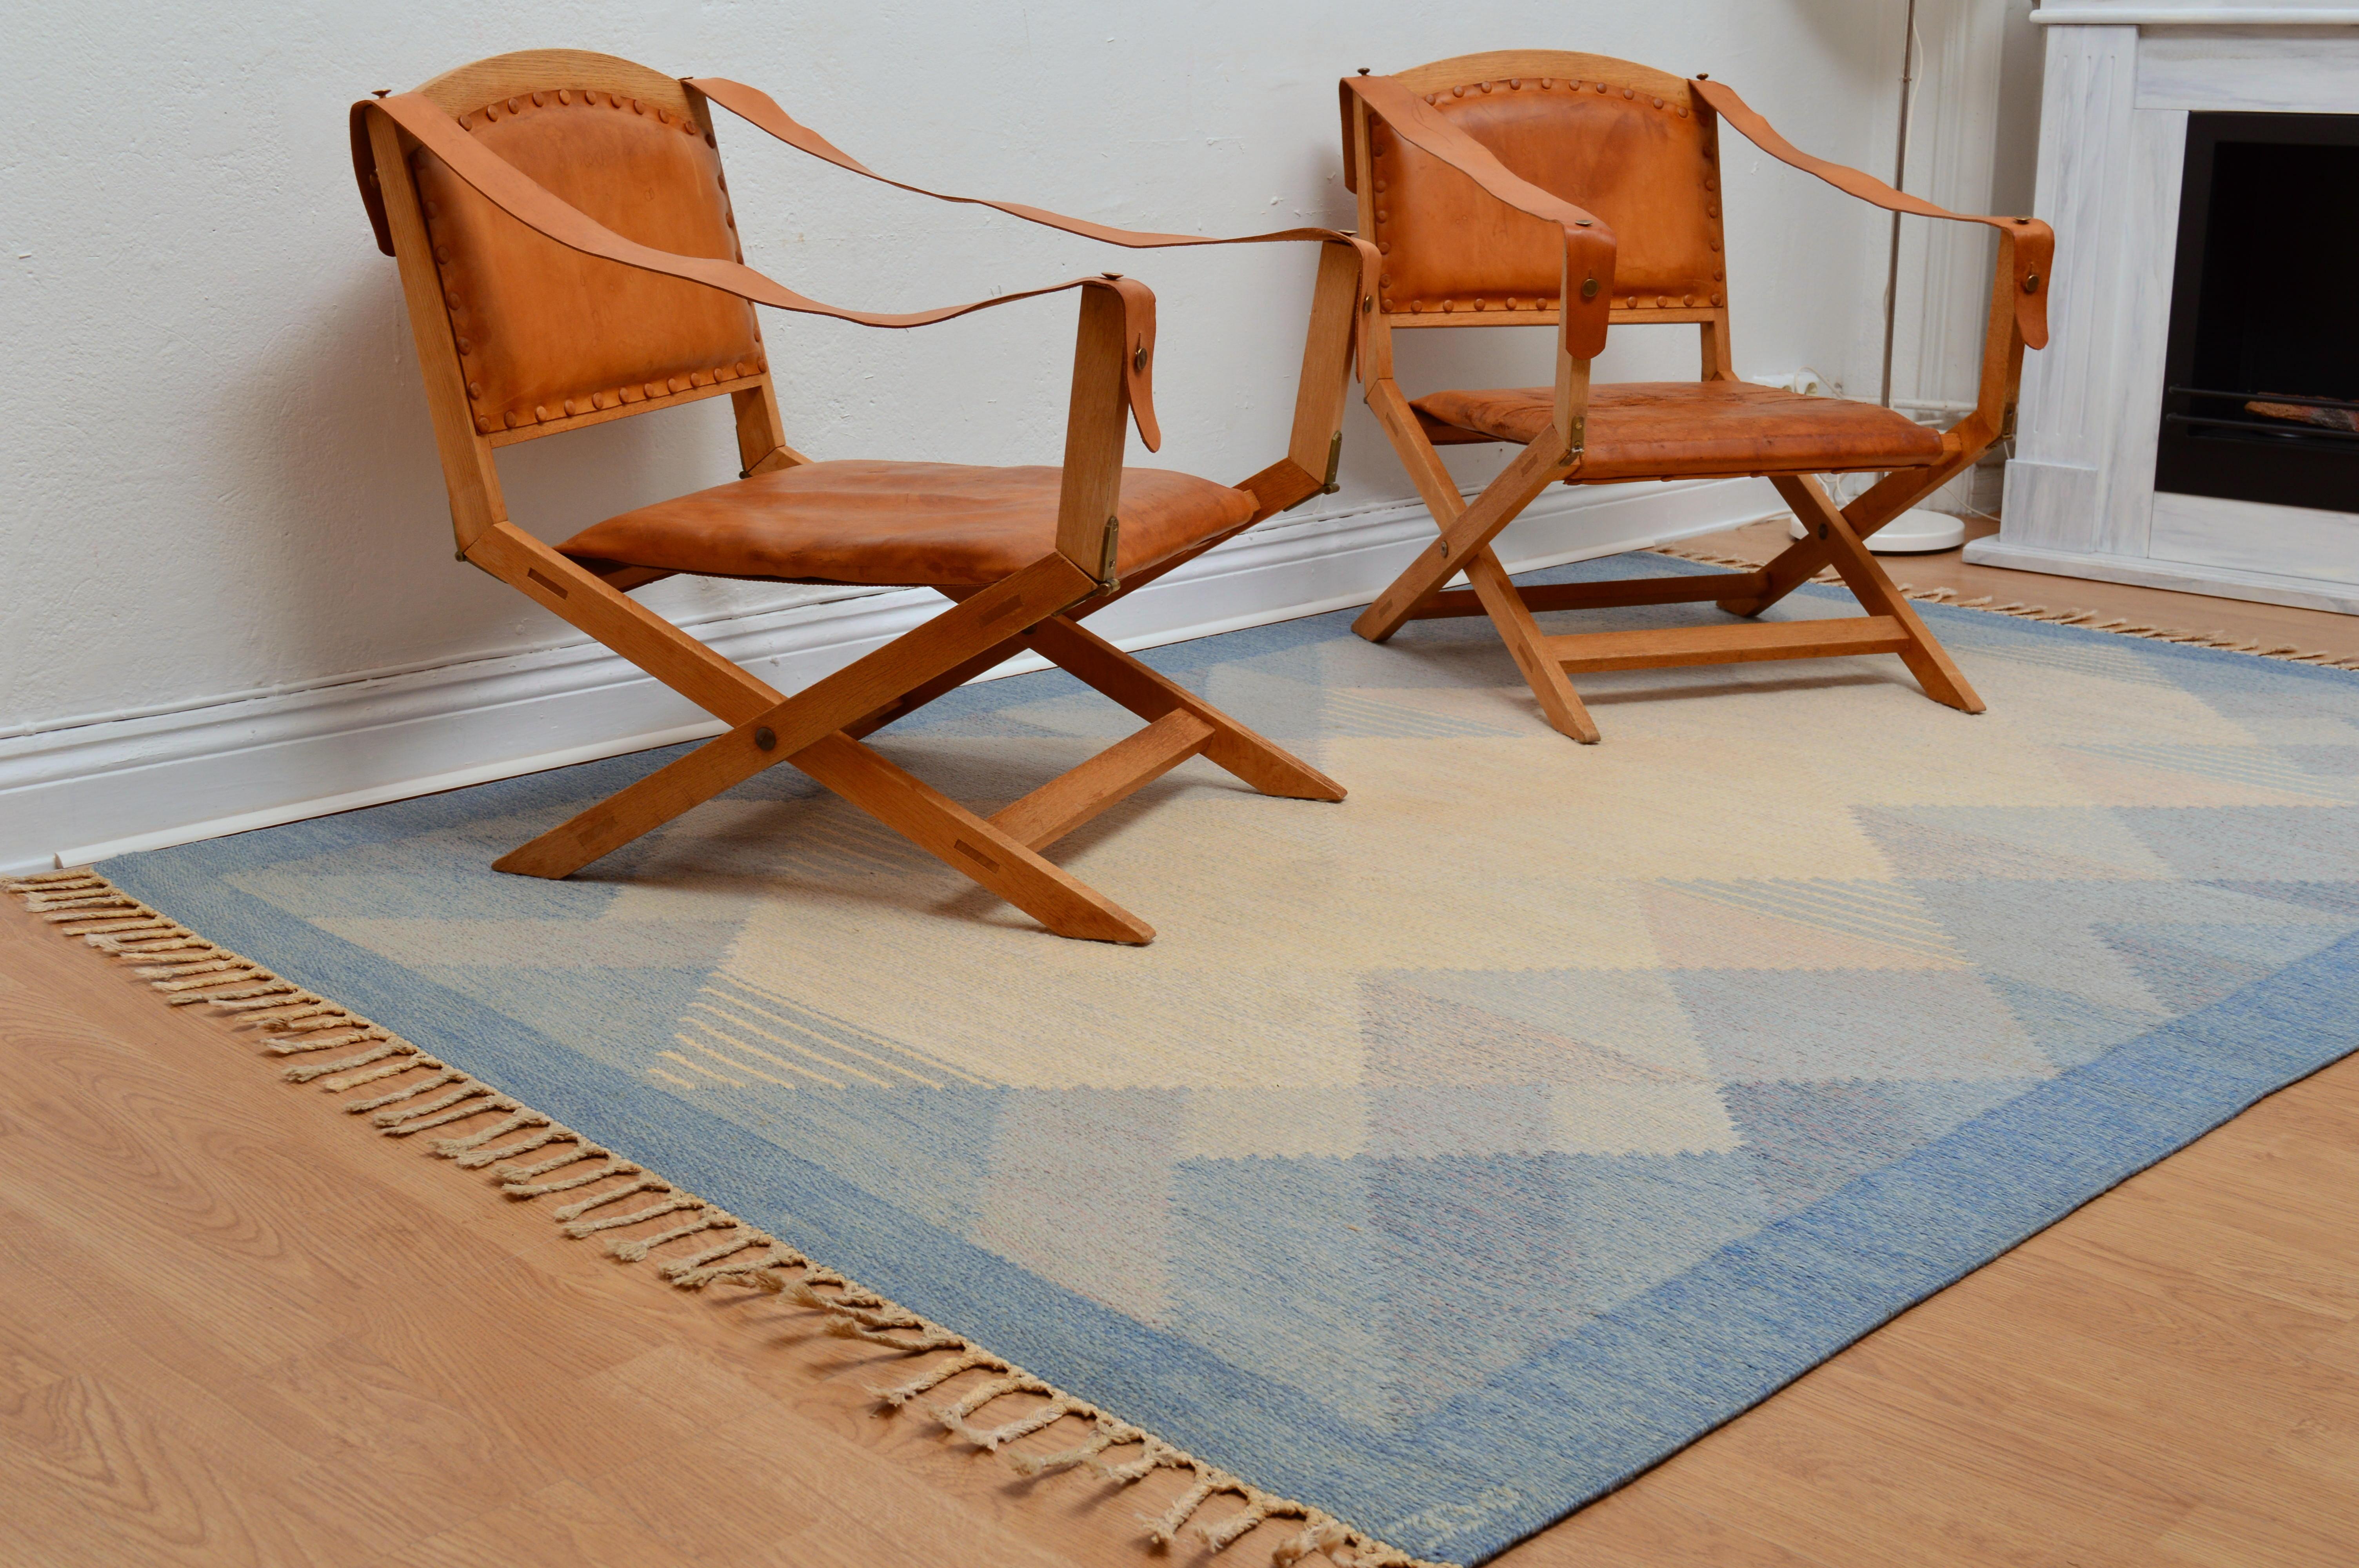 This rölakan carpet / kelim rug ”Aniara” was designed by Anna Johanna Ångström during the 1960s. This excellent example with mainly different shades of blue and beige was woven in wool and signed ”Å” to the right hand corner. Fringes in a good